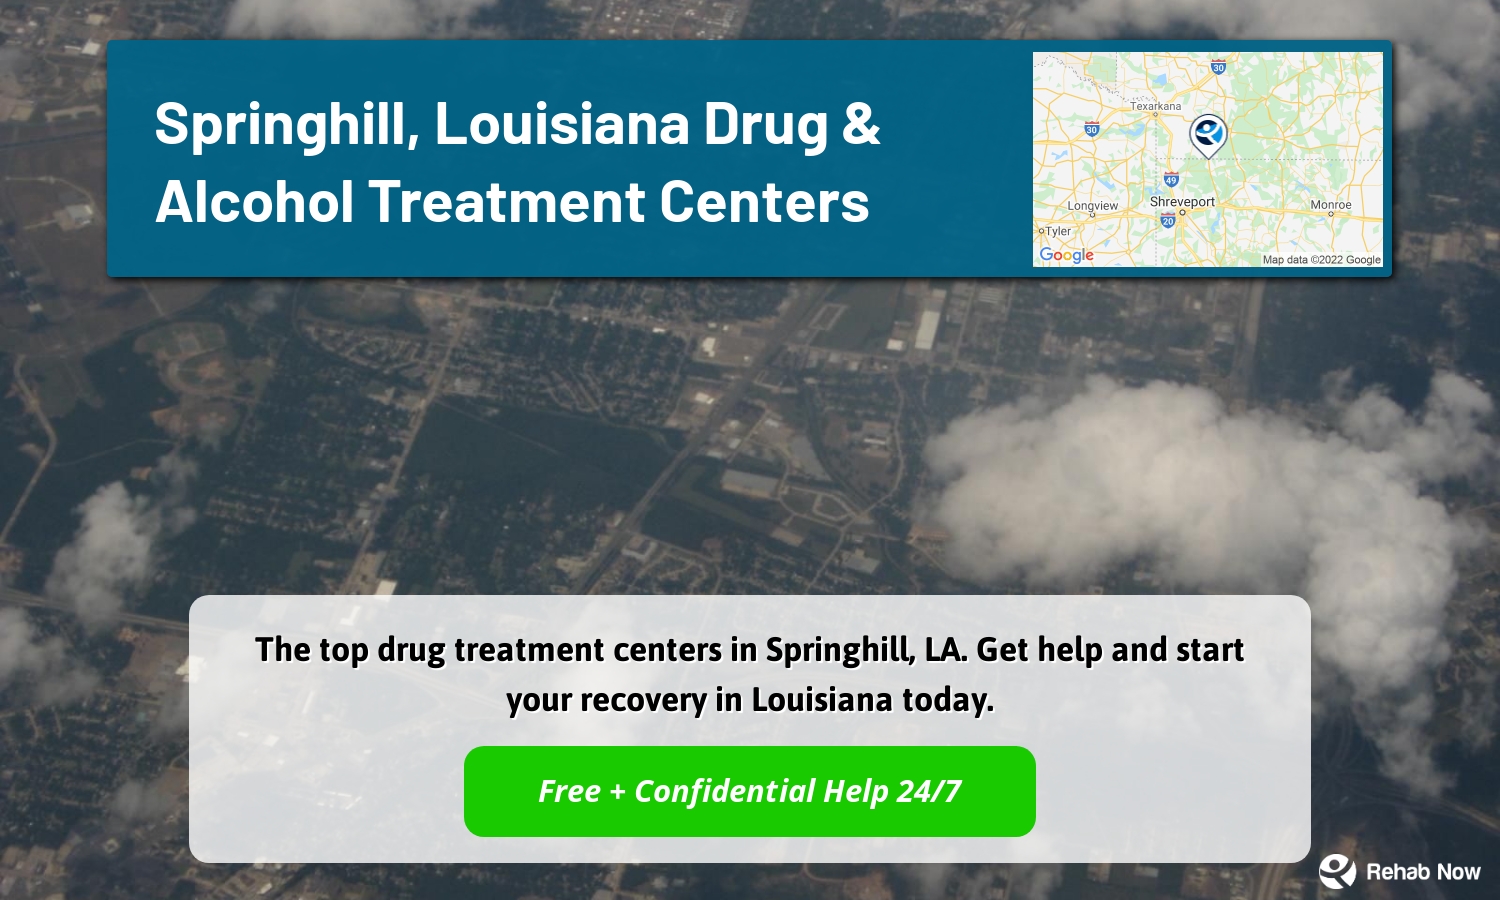 The top drug treatment centers in Springhill, LA. Get help and start your recovery in Louisiana today.